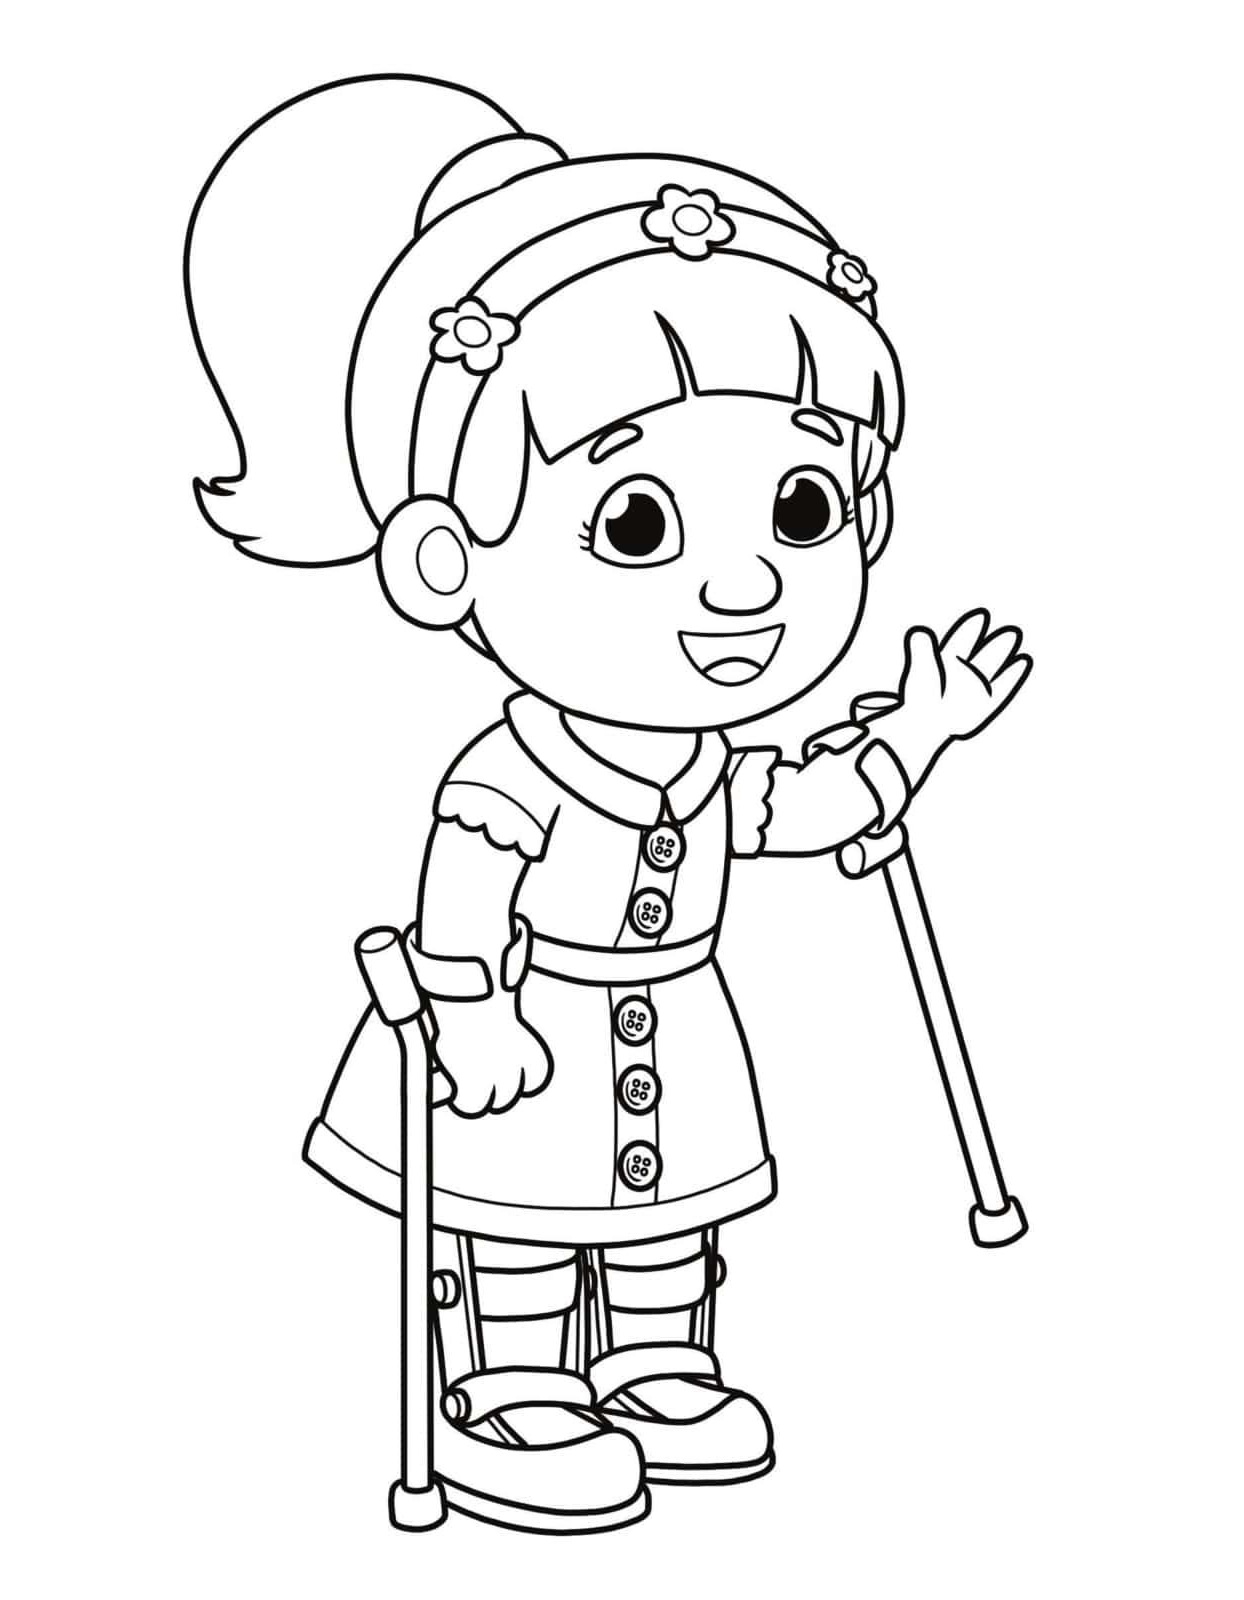 chrissie coloring page free printable coloring pages for kids